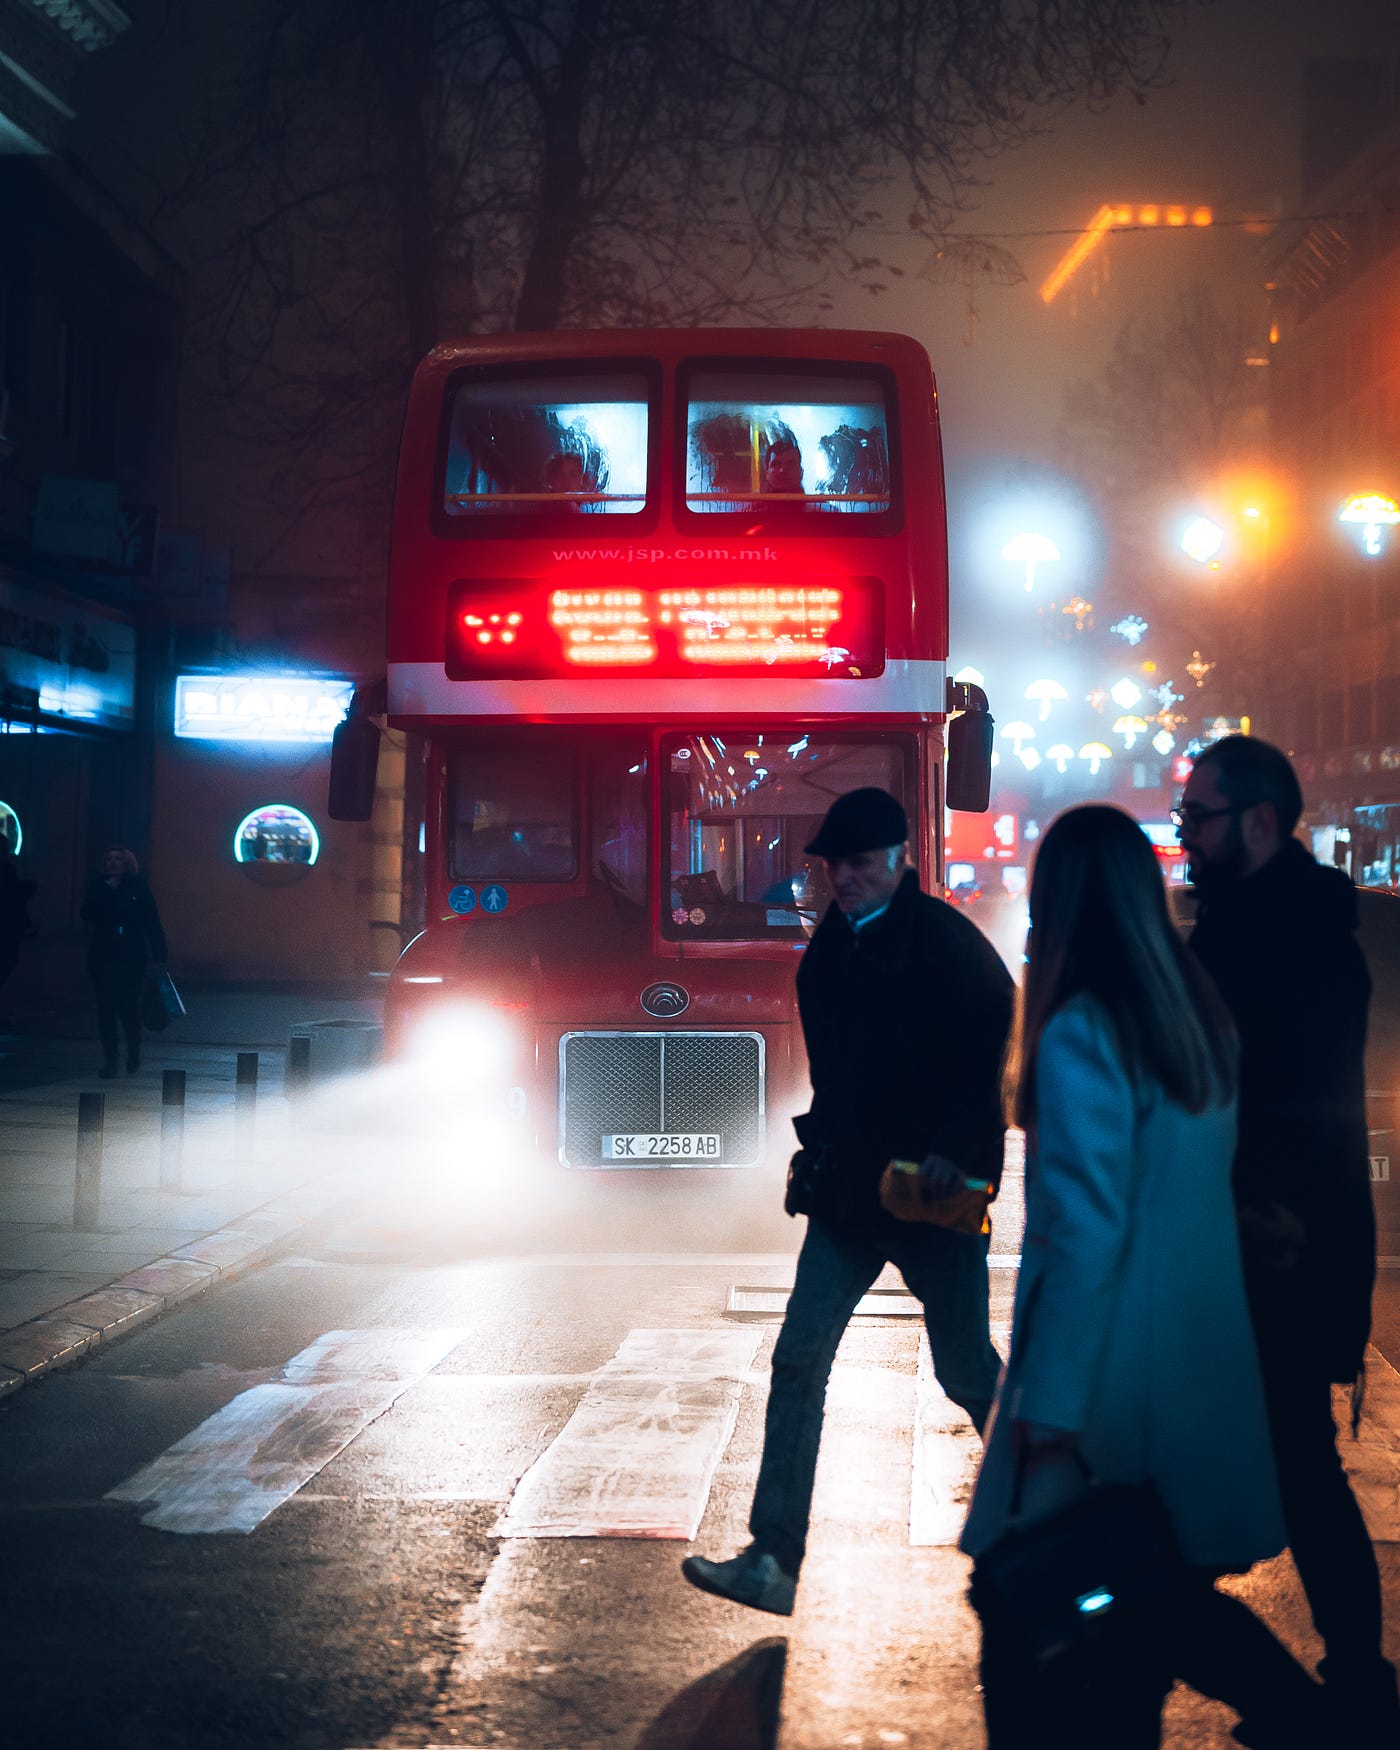 Three individuals walk in front of a London double decker red bus at night.